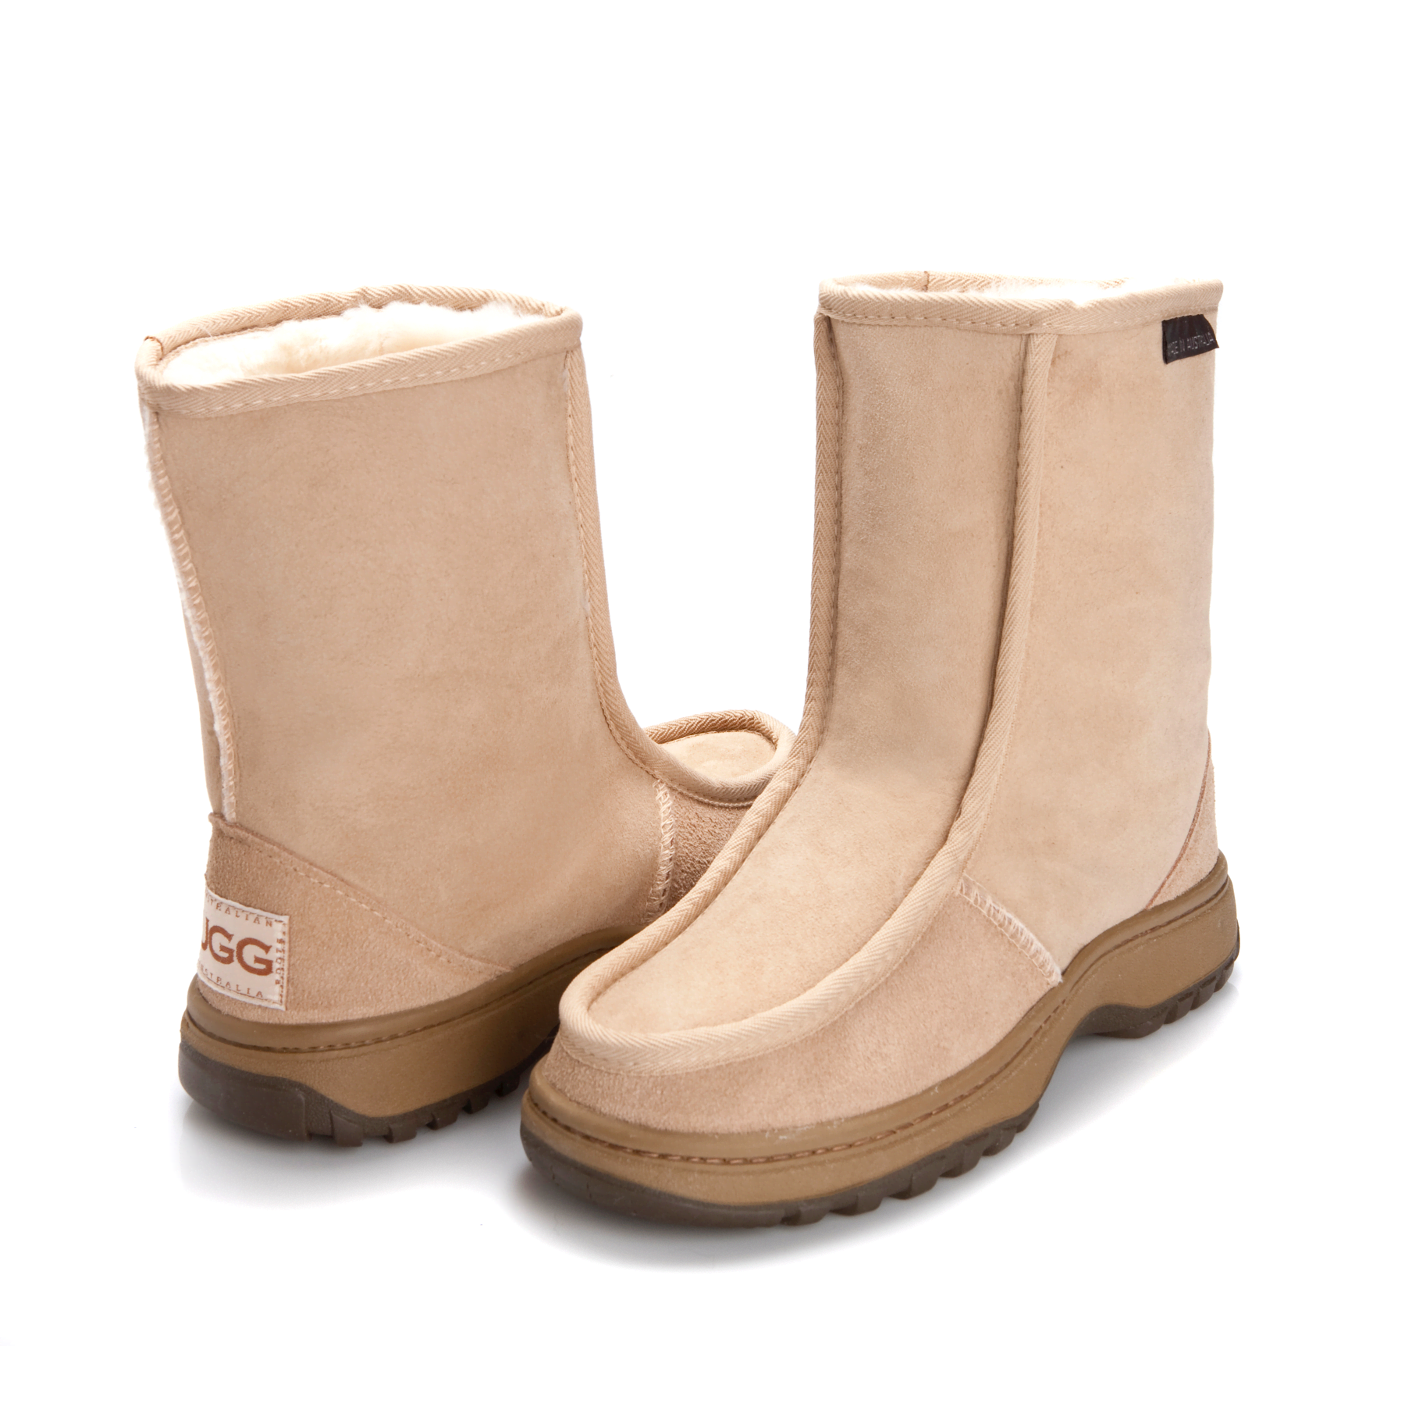 Men's Alpine Boot with outdoor sole - mid calf length in sand colour